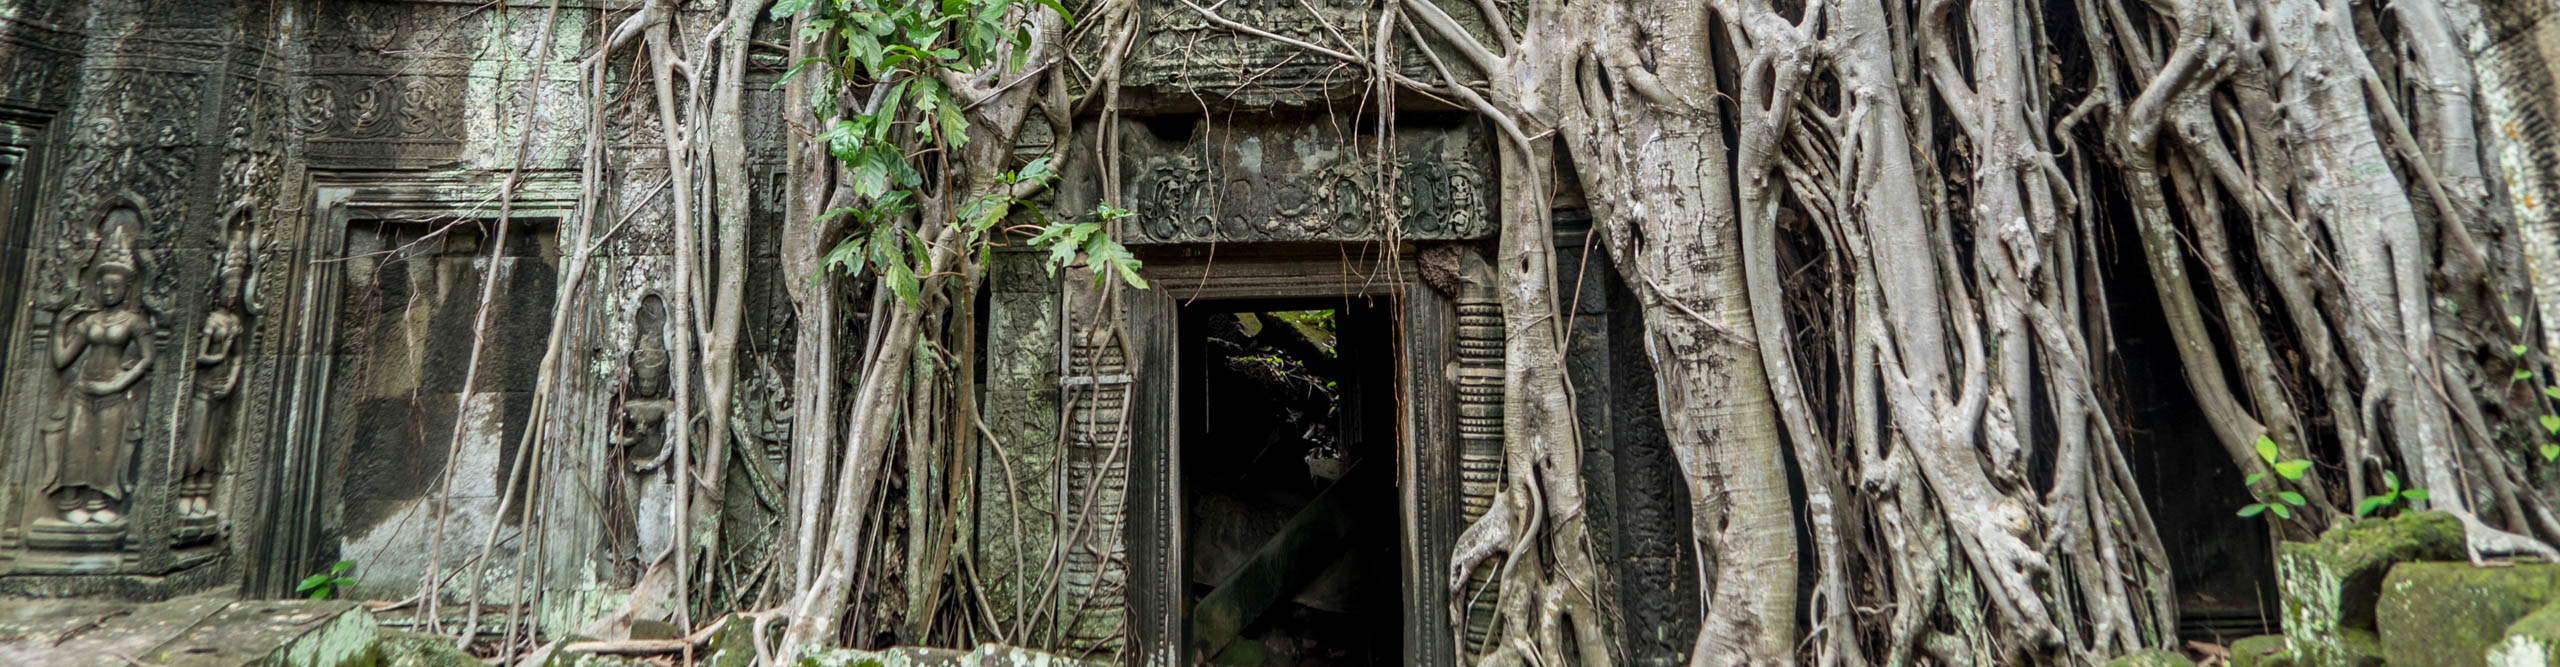 Overgrown temple in the Angkor Wat complex